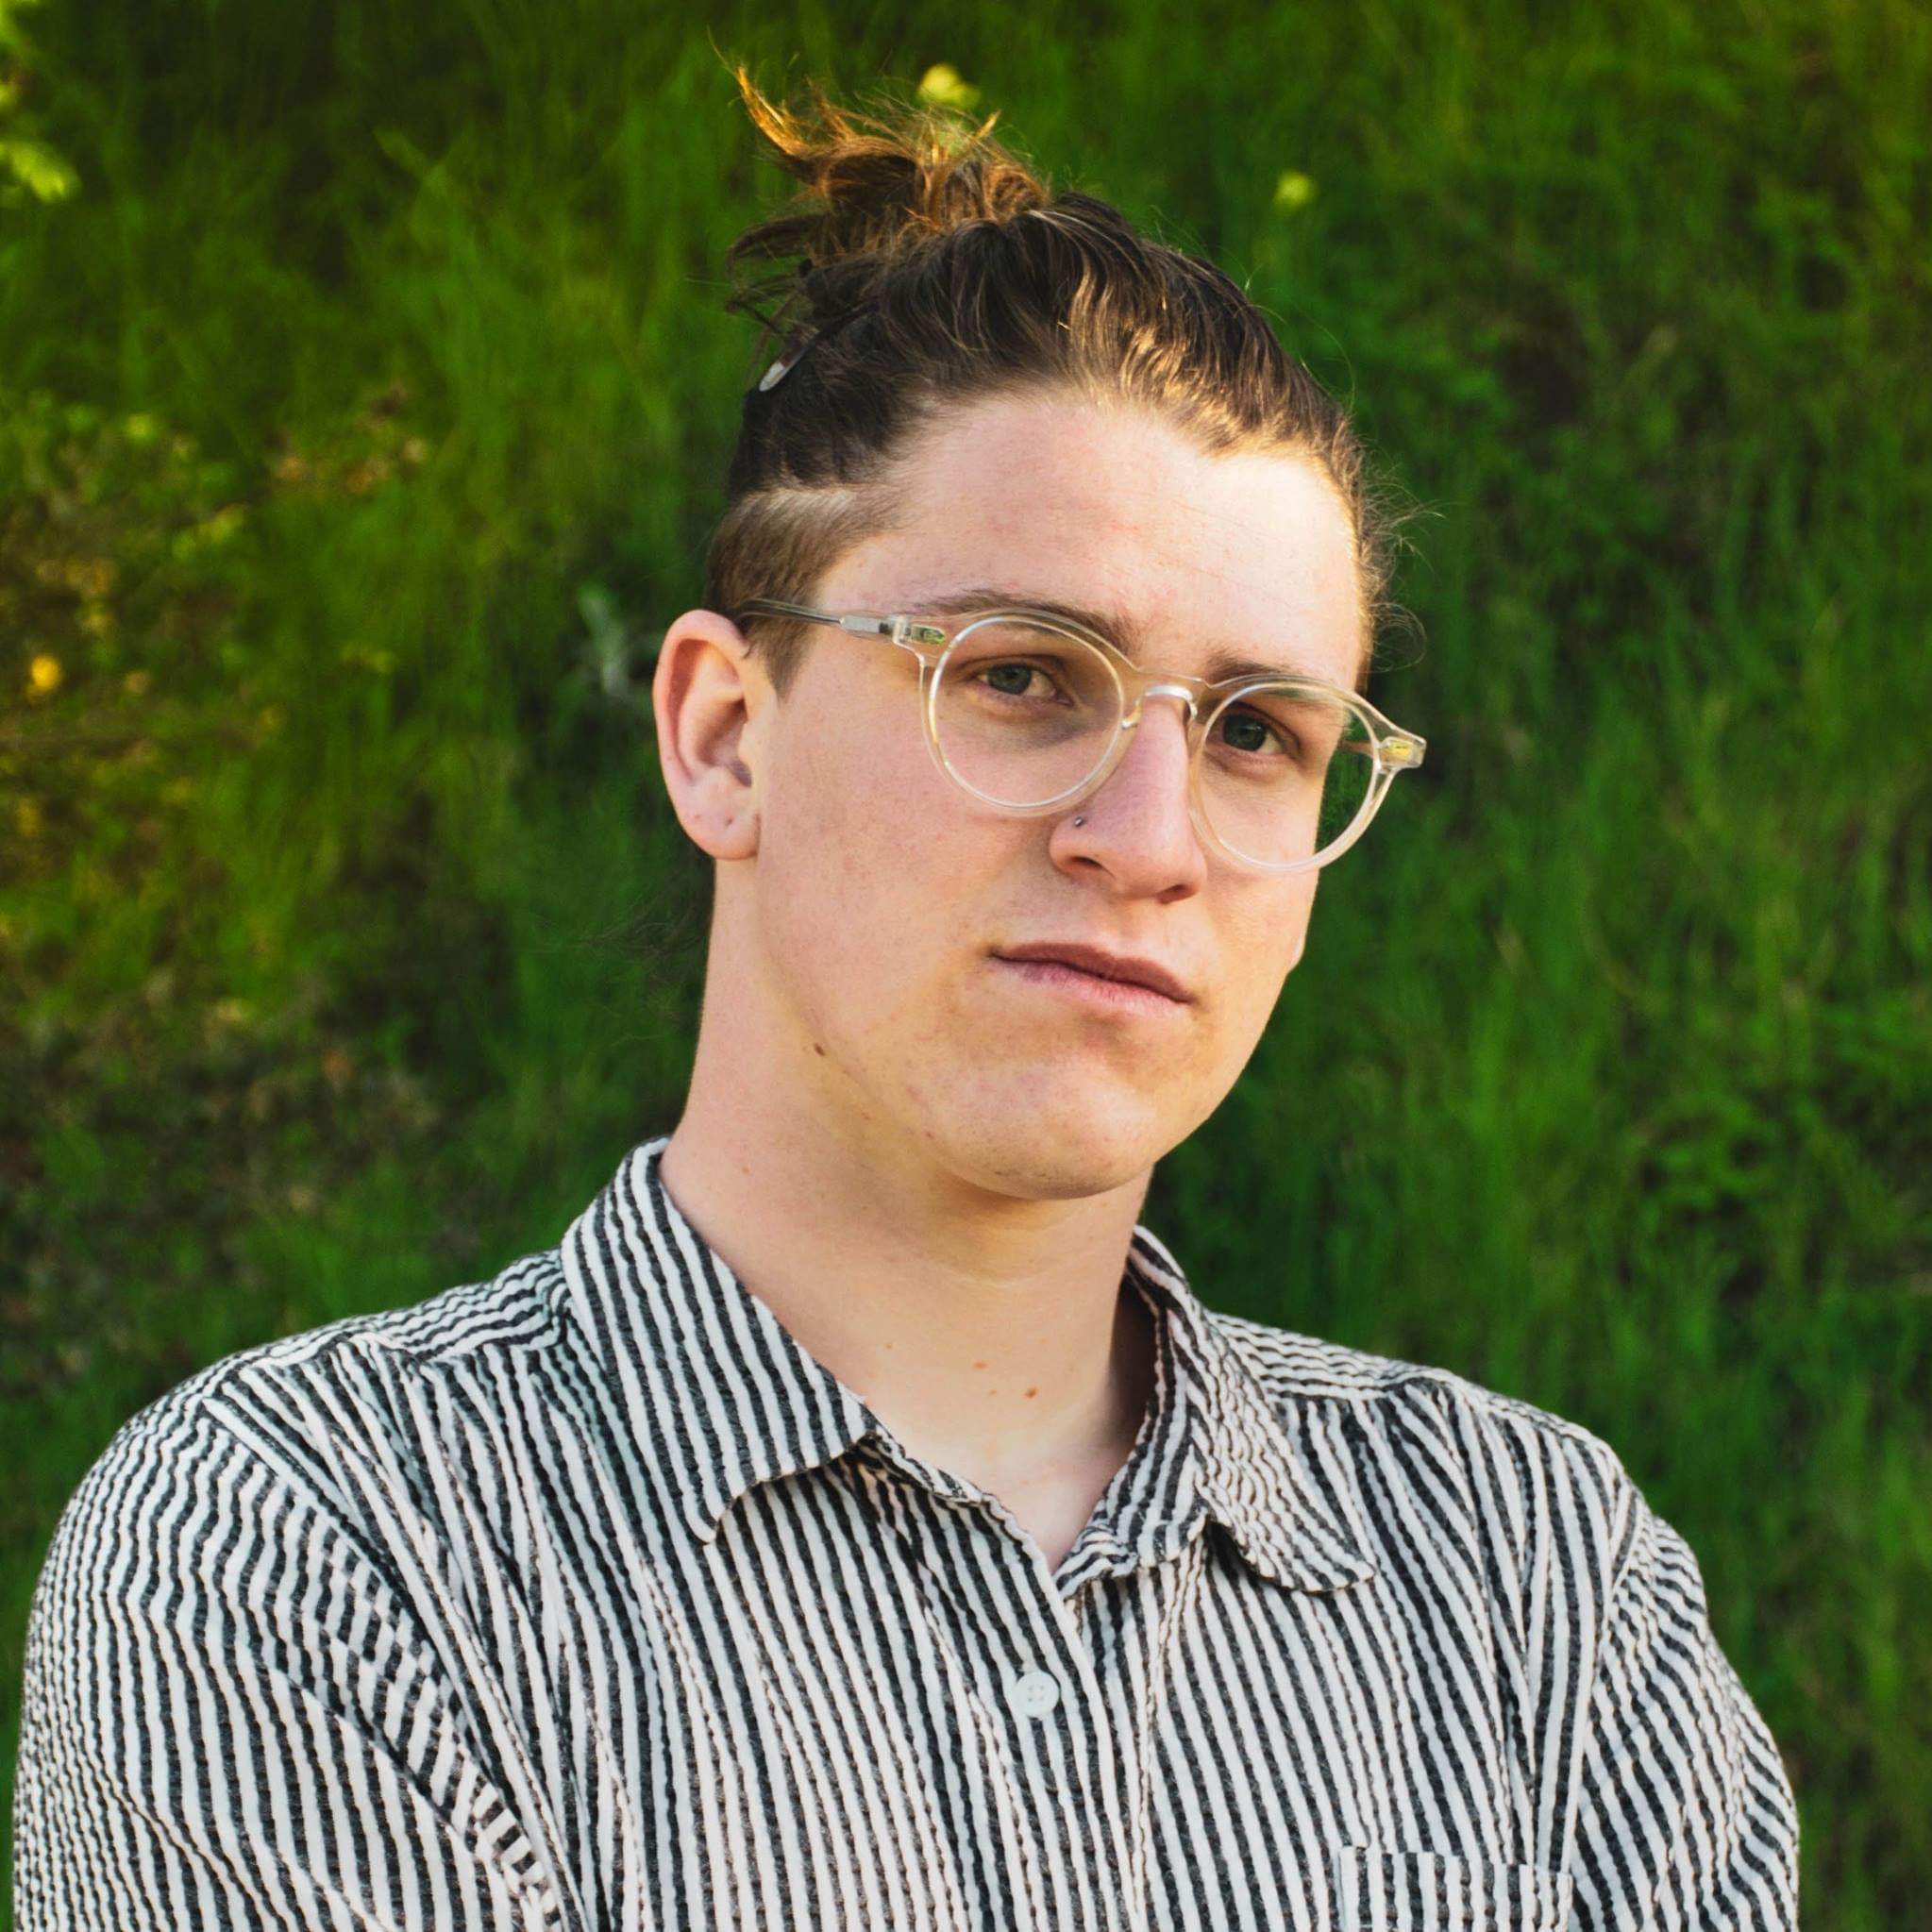 photo of Lachlan with glasses and man bun